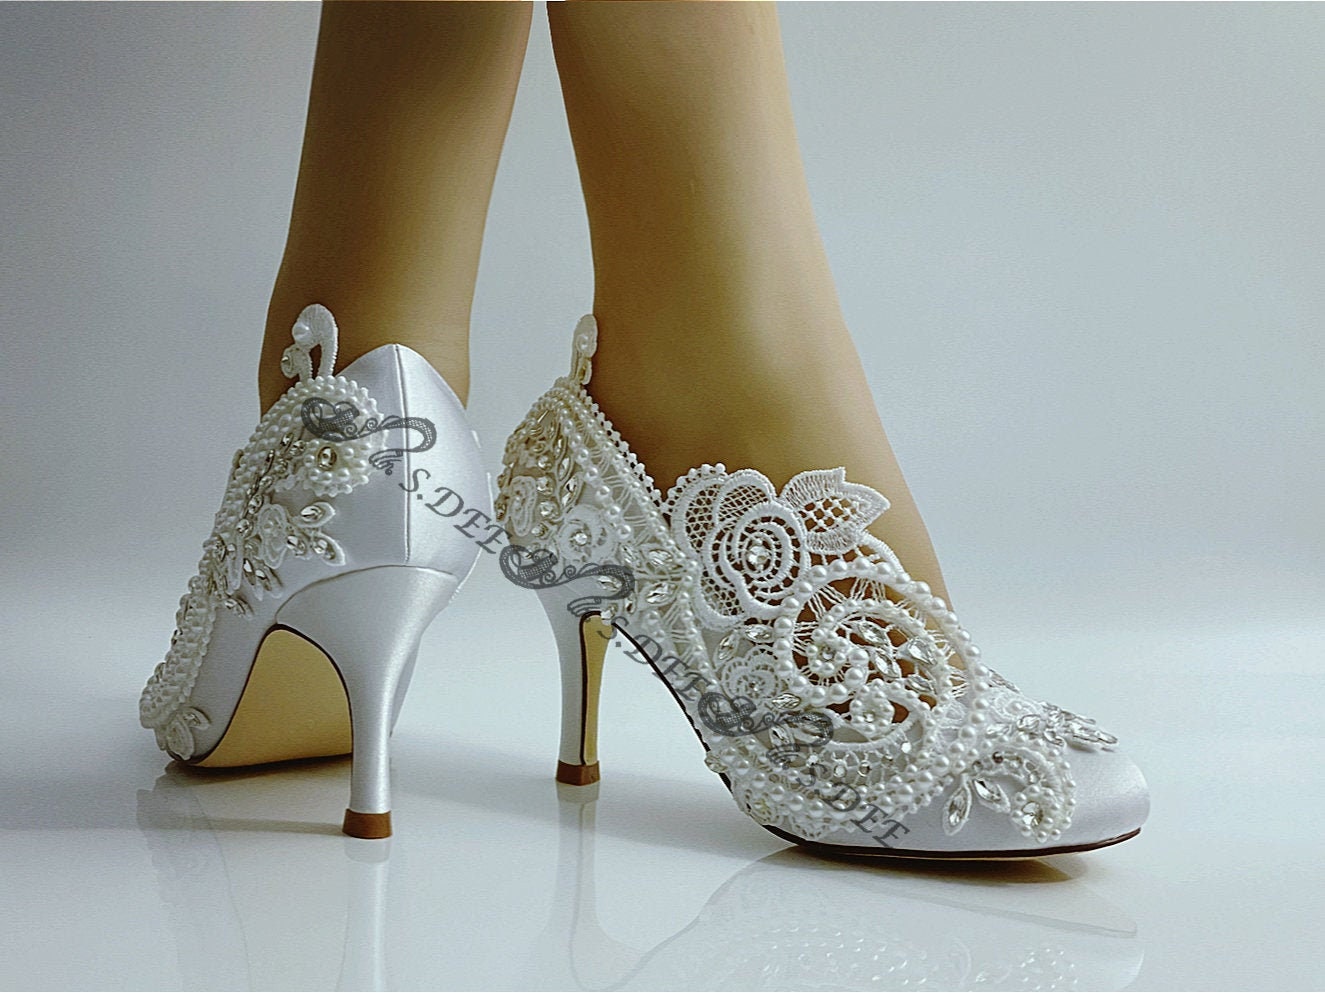 Bling Wedding Shoes, Ivory Satin and Lace Bridal Shoes with Rhinestones